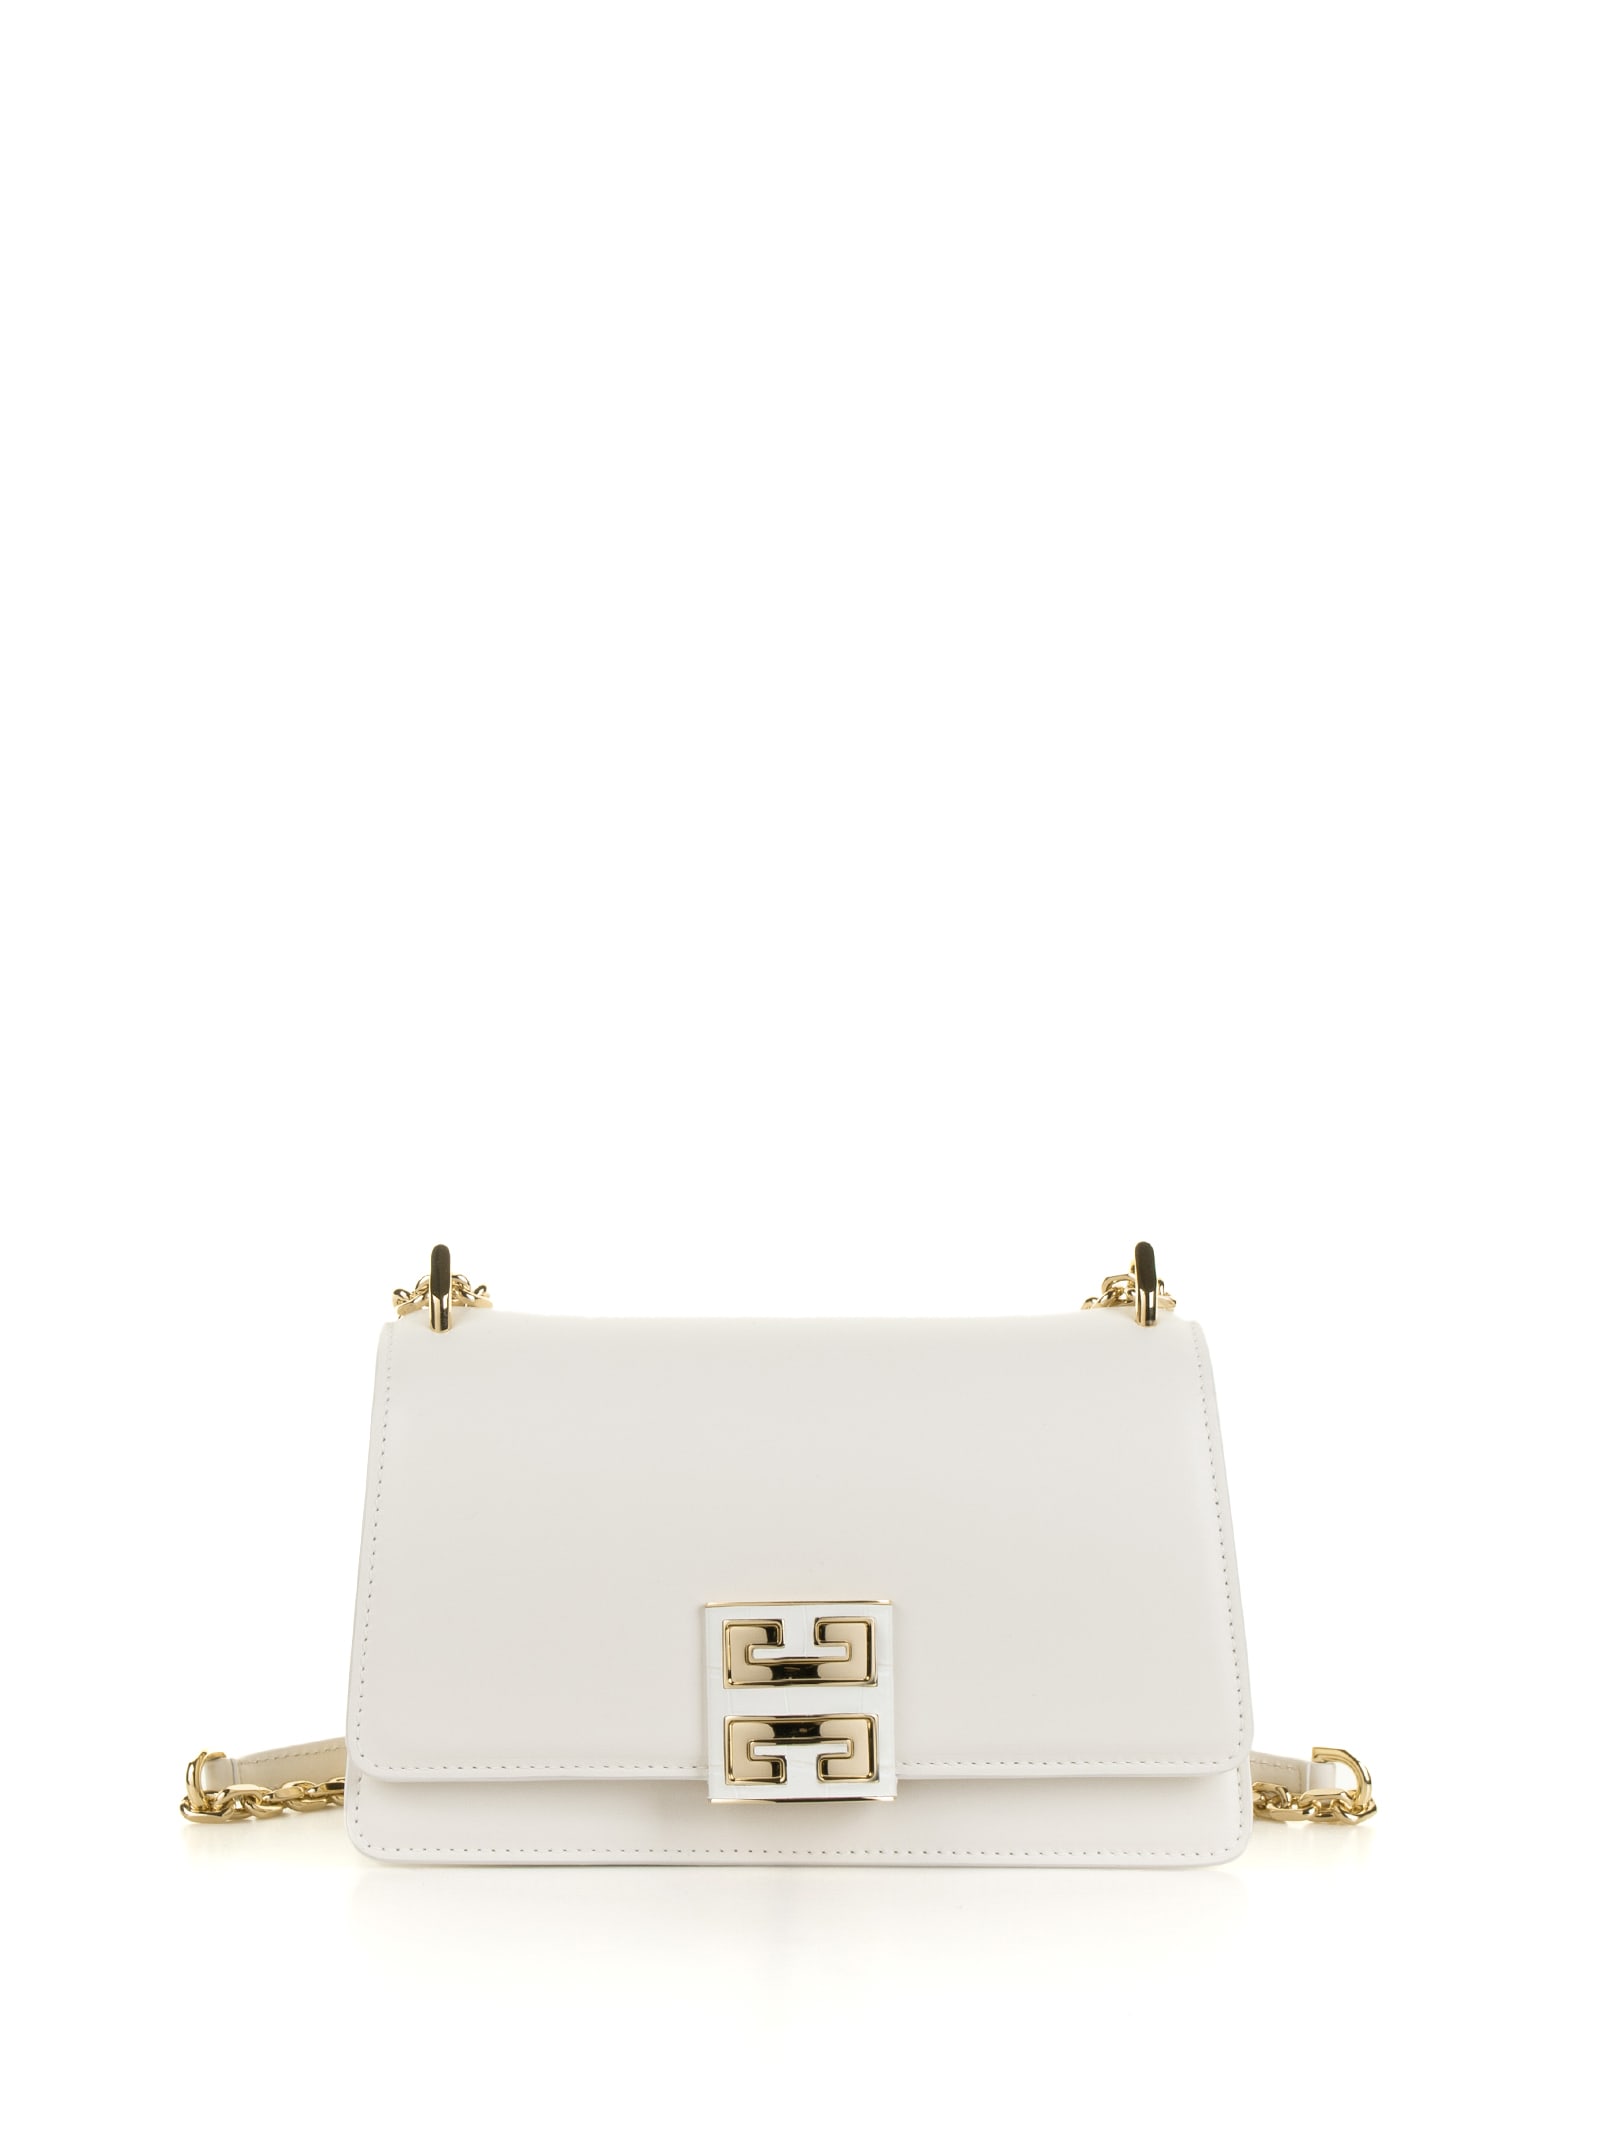 Givenchy Small Leather Shoulder Bag With Chain In Ivory